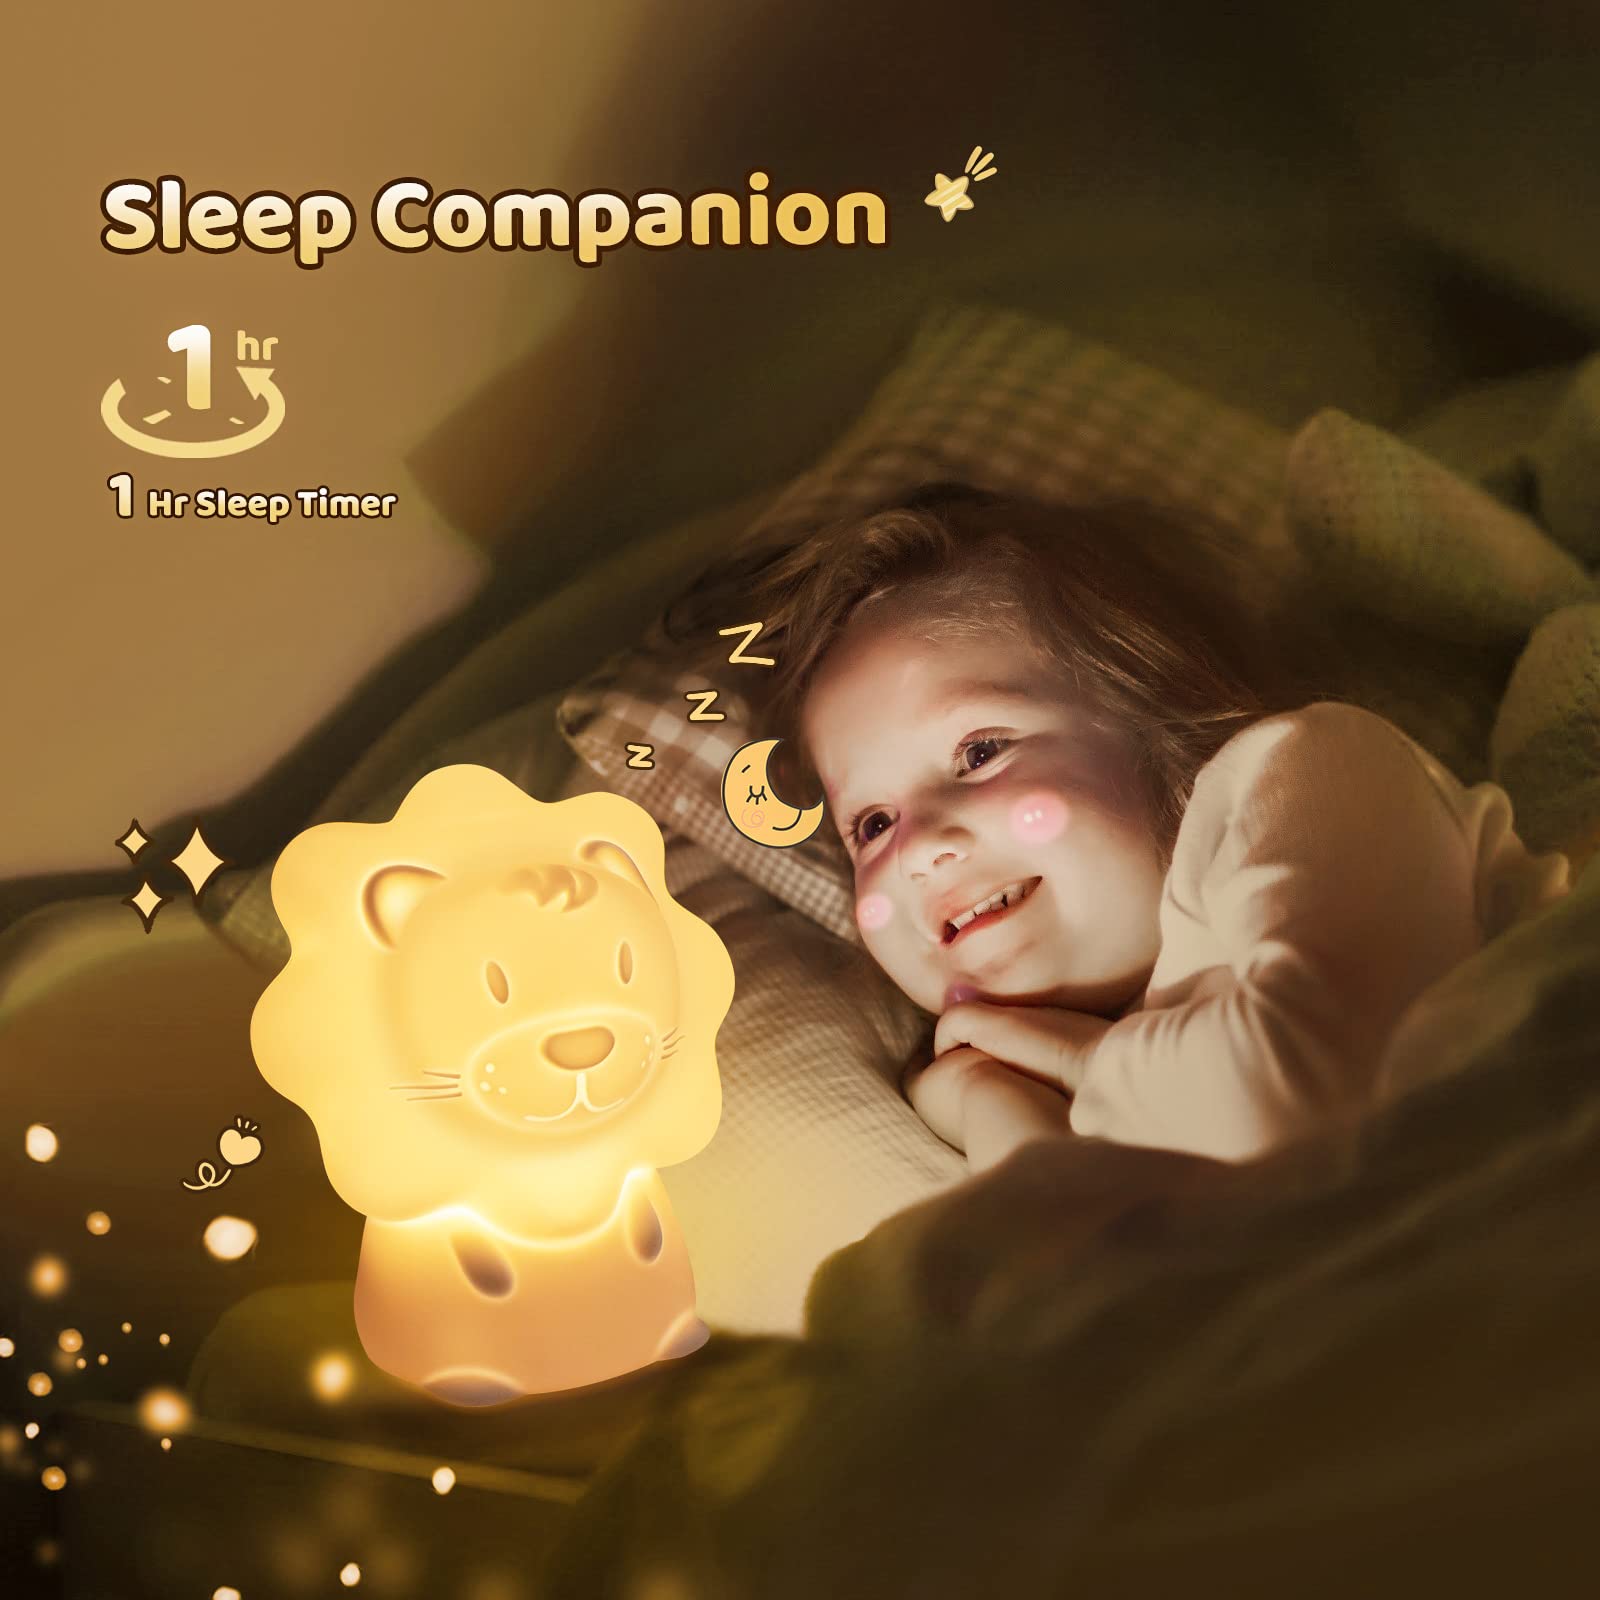 ONEWISH Night Light for Kids - Portable Cute Lion Baby Night Light, Silicone Nursery Lamp with 7-Color Breathing Modes, Nightlight with Timer, for Toddler Baby Kids Teens, Thanksgiving Gift, Christmas